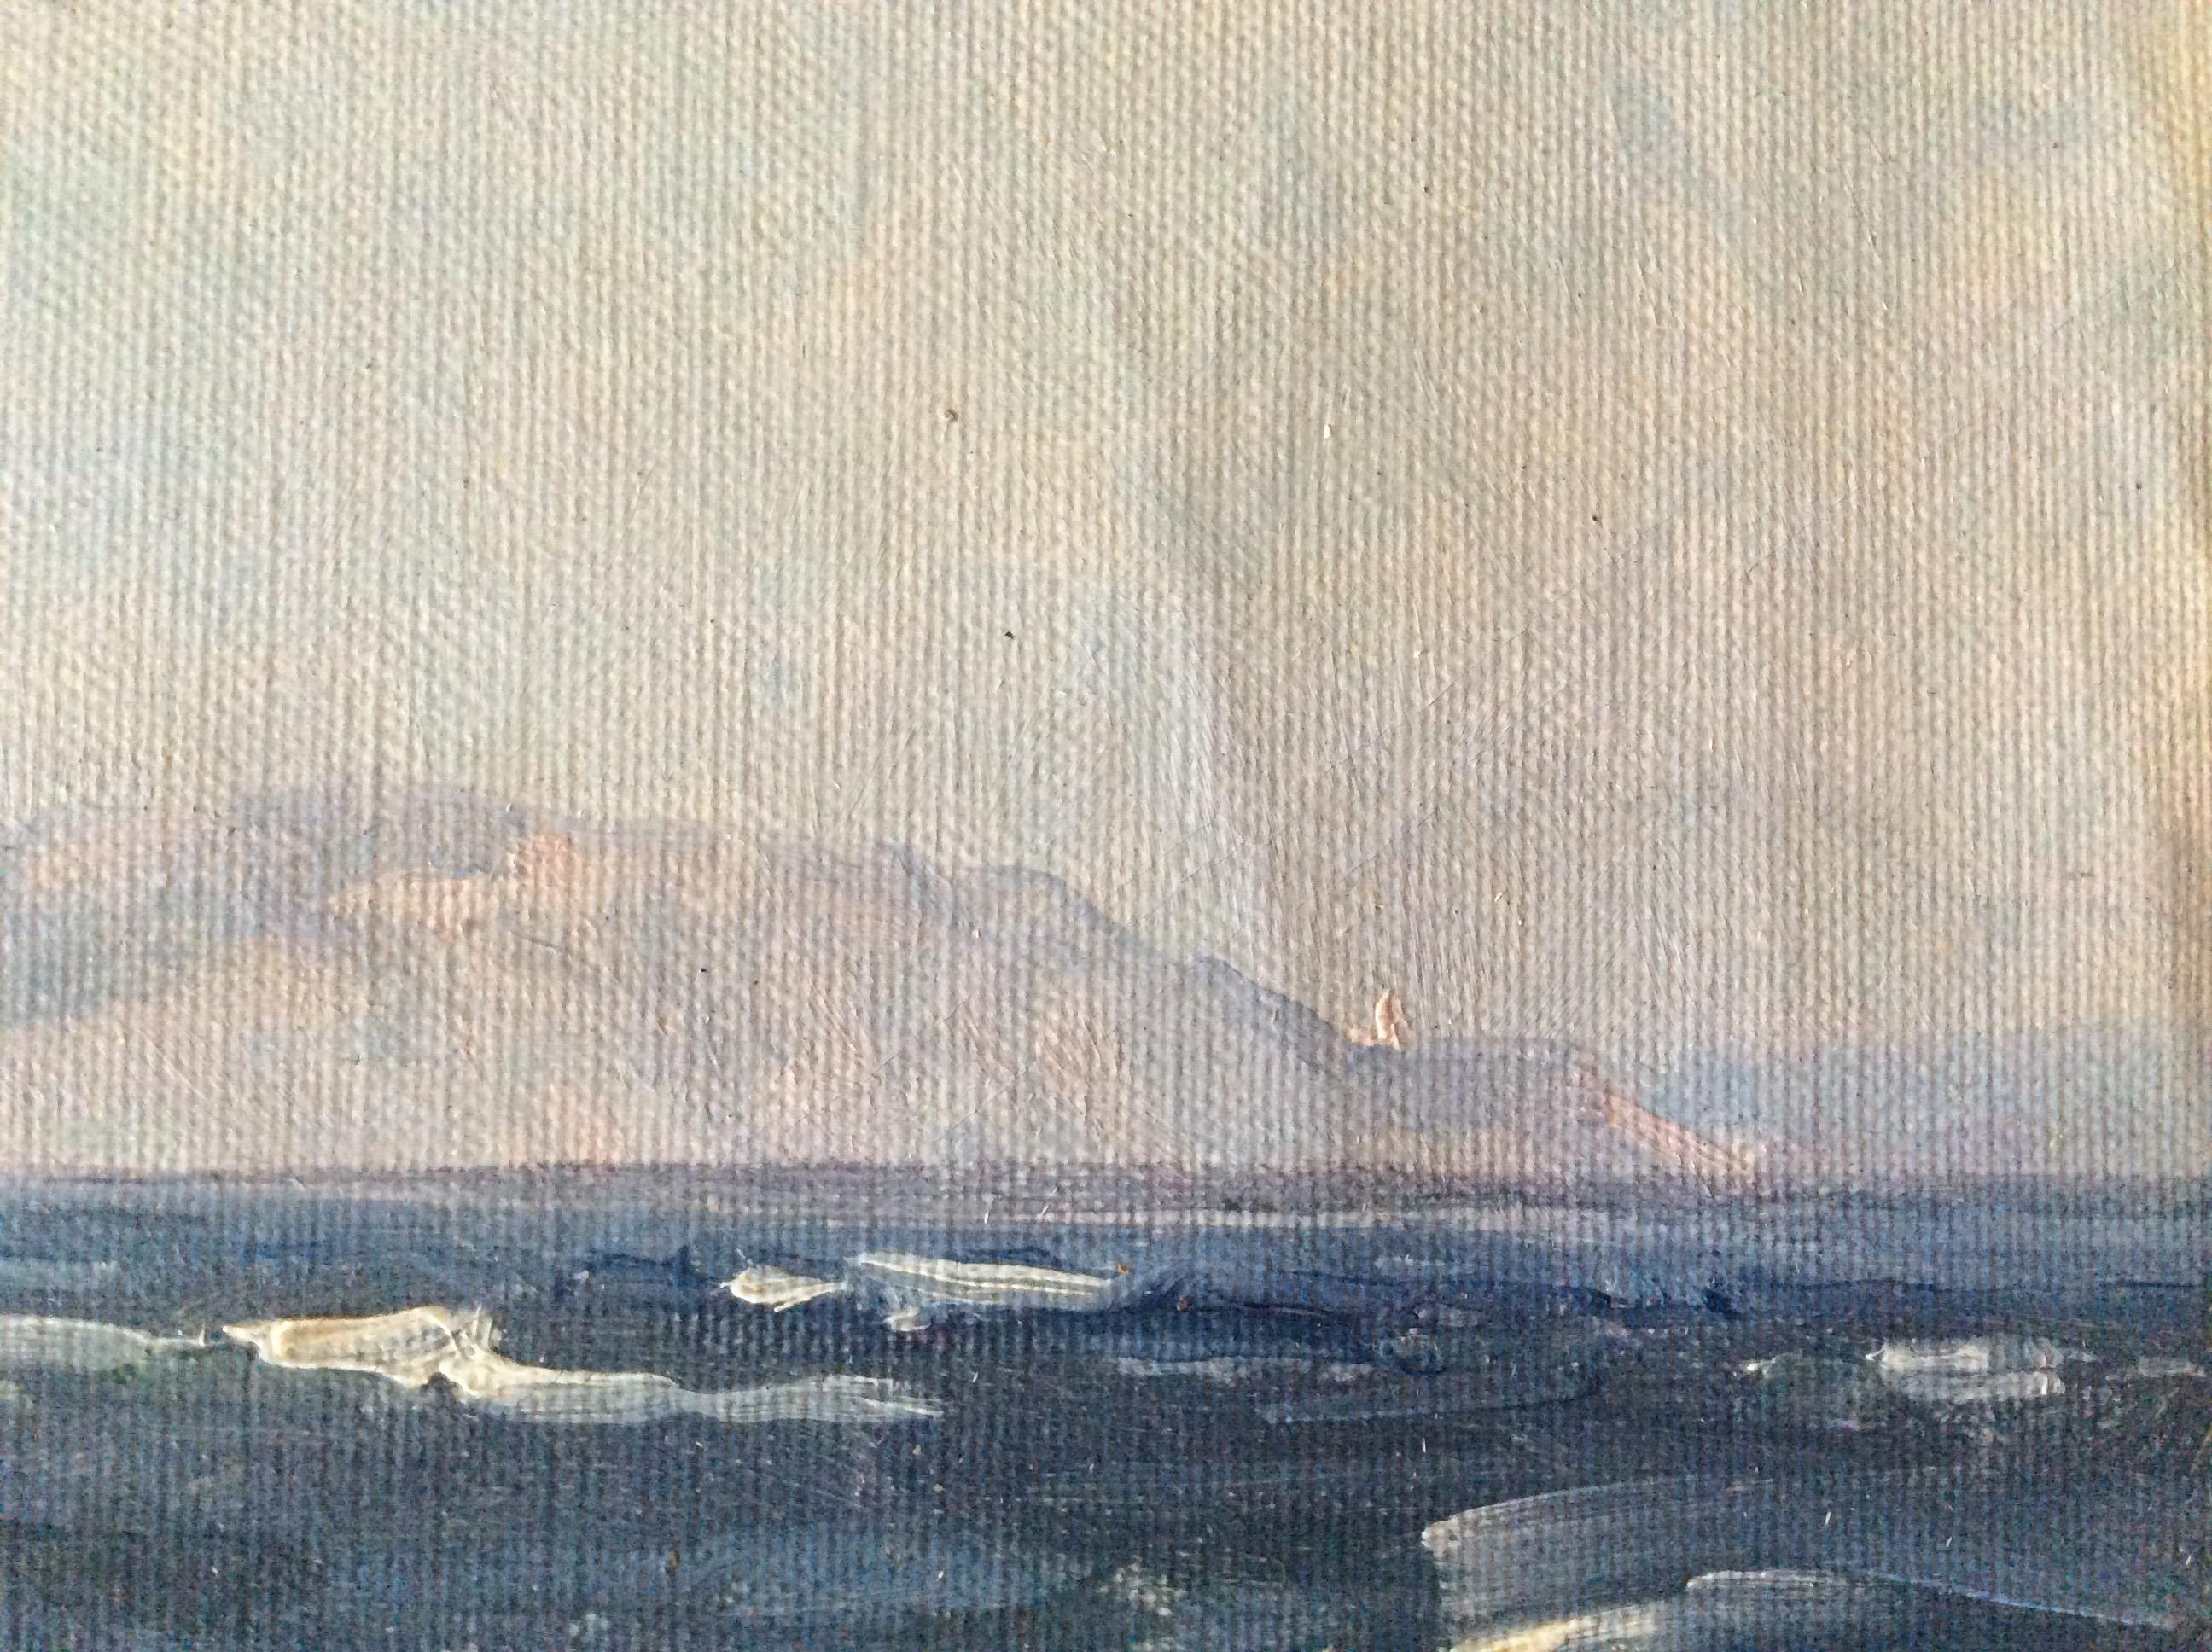 Danish Painting Frederik Winther, Cap Finisterre Spain For Sale